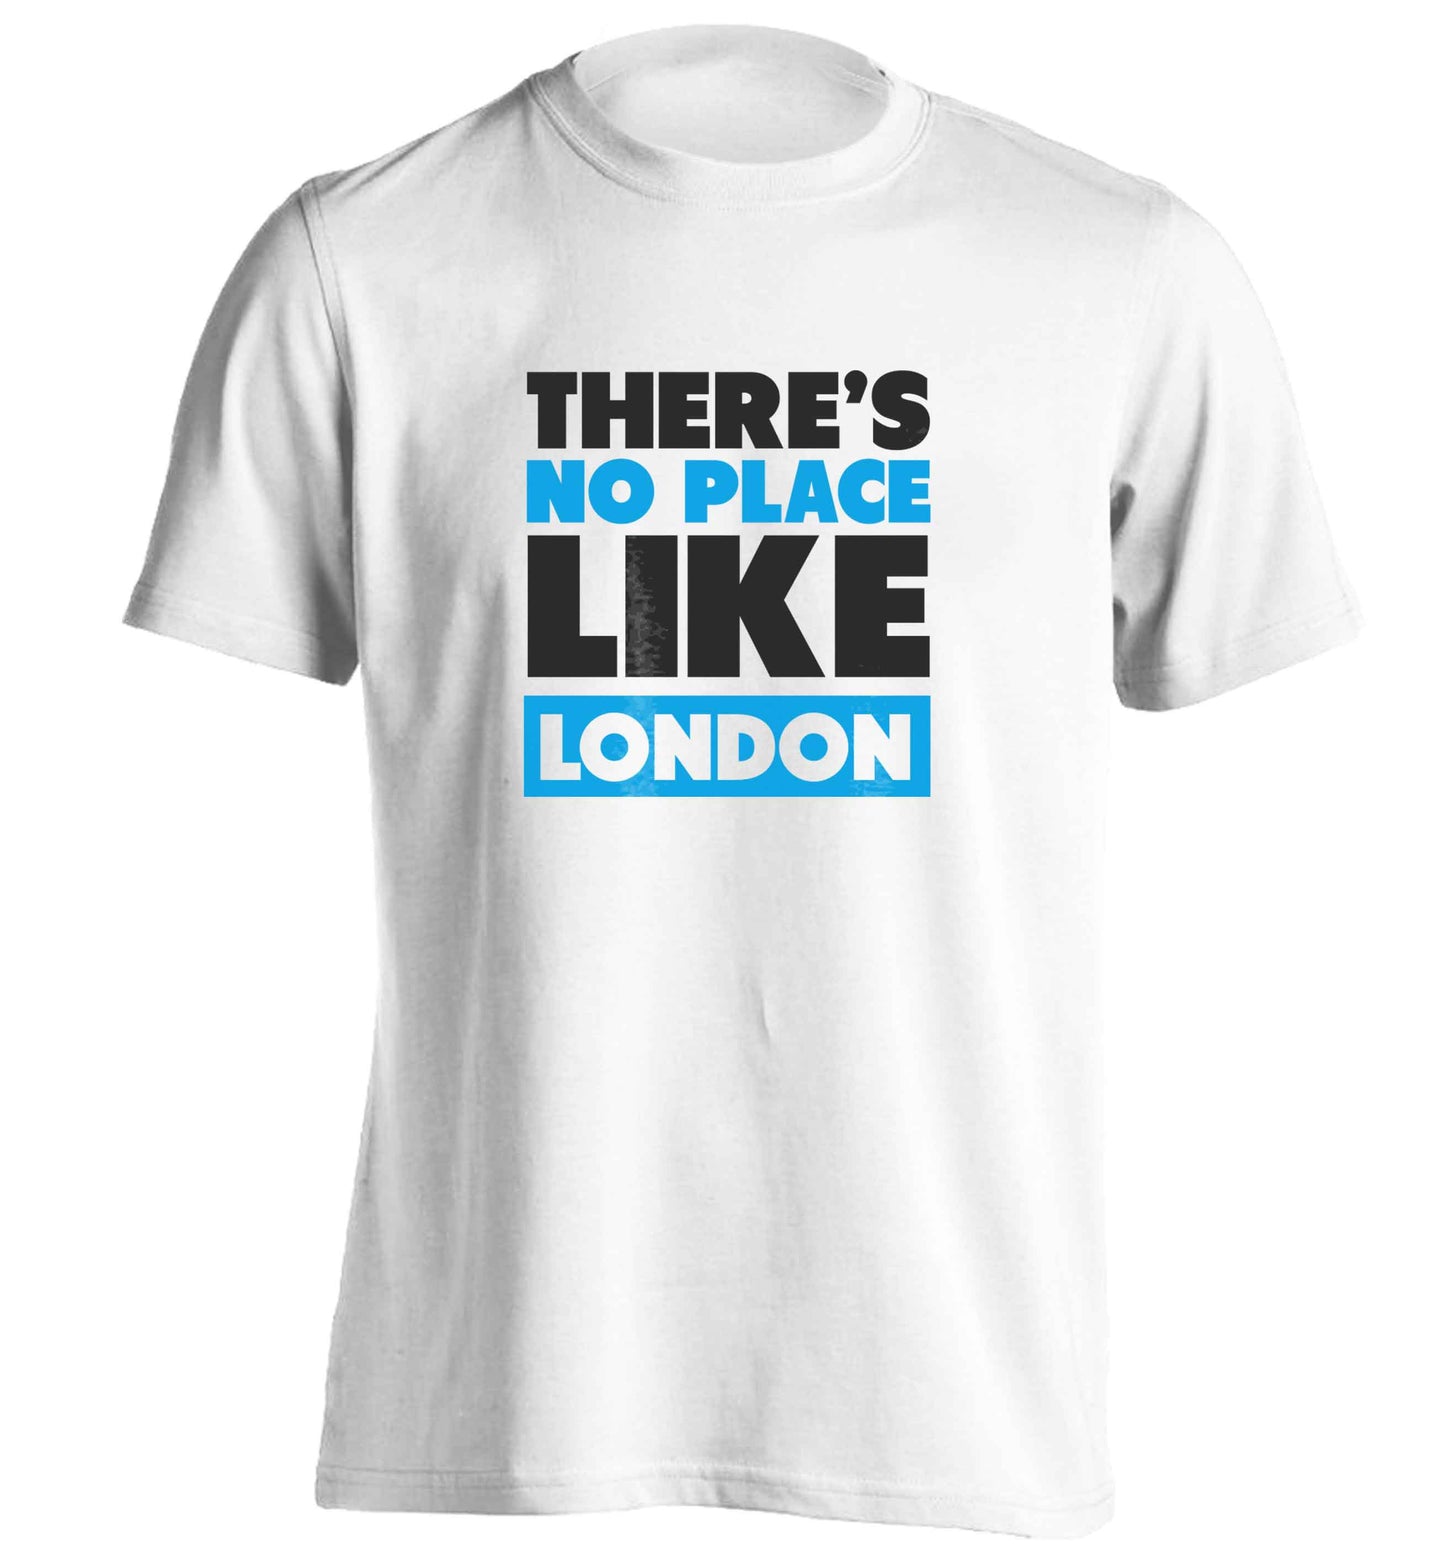 There's no place like England adults unisex white Tshirt 2XL